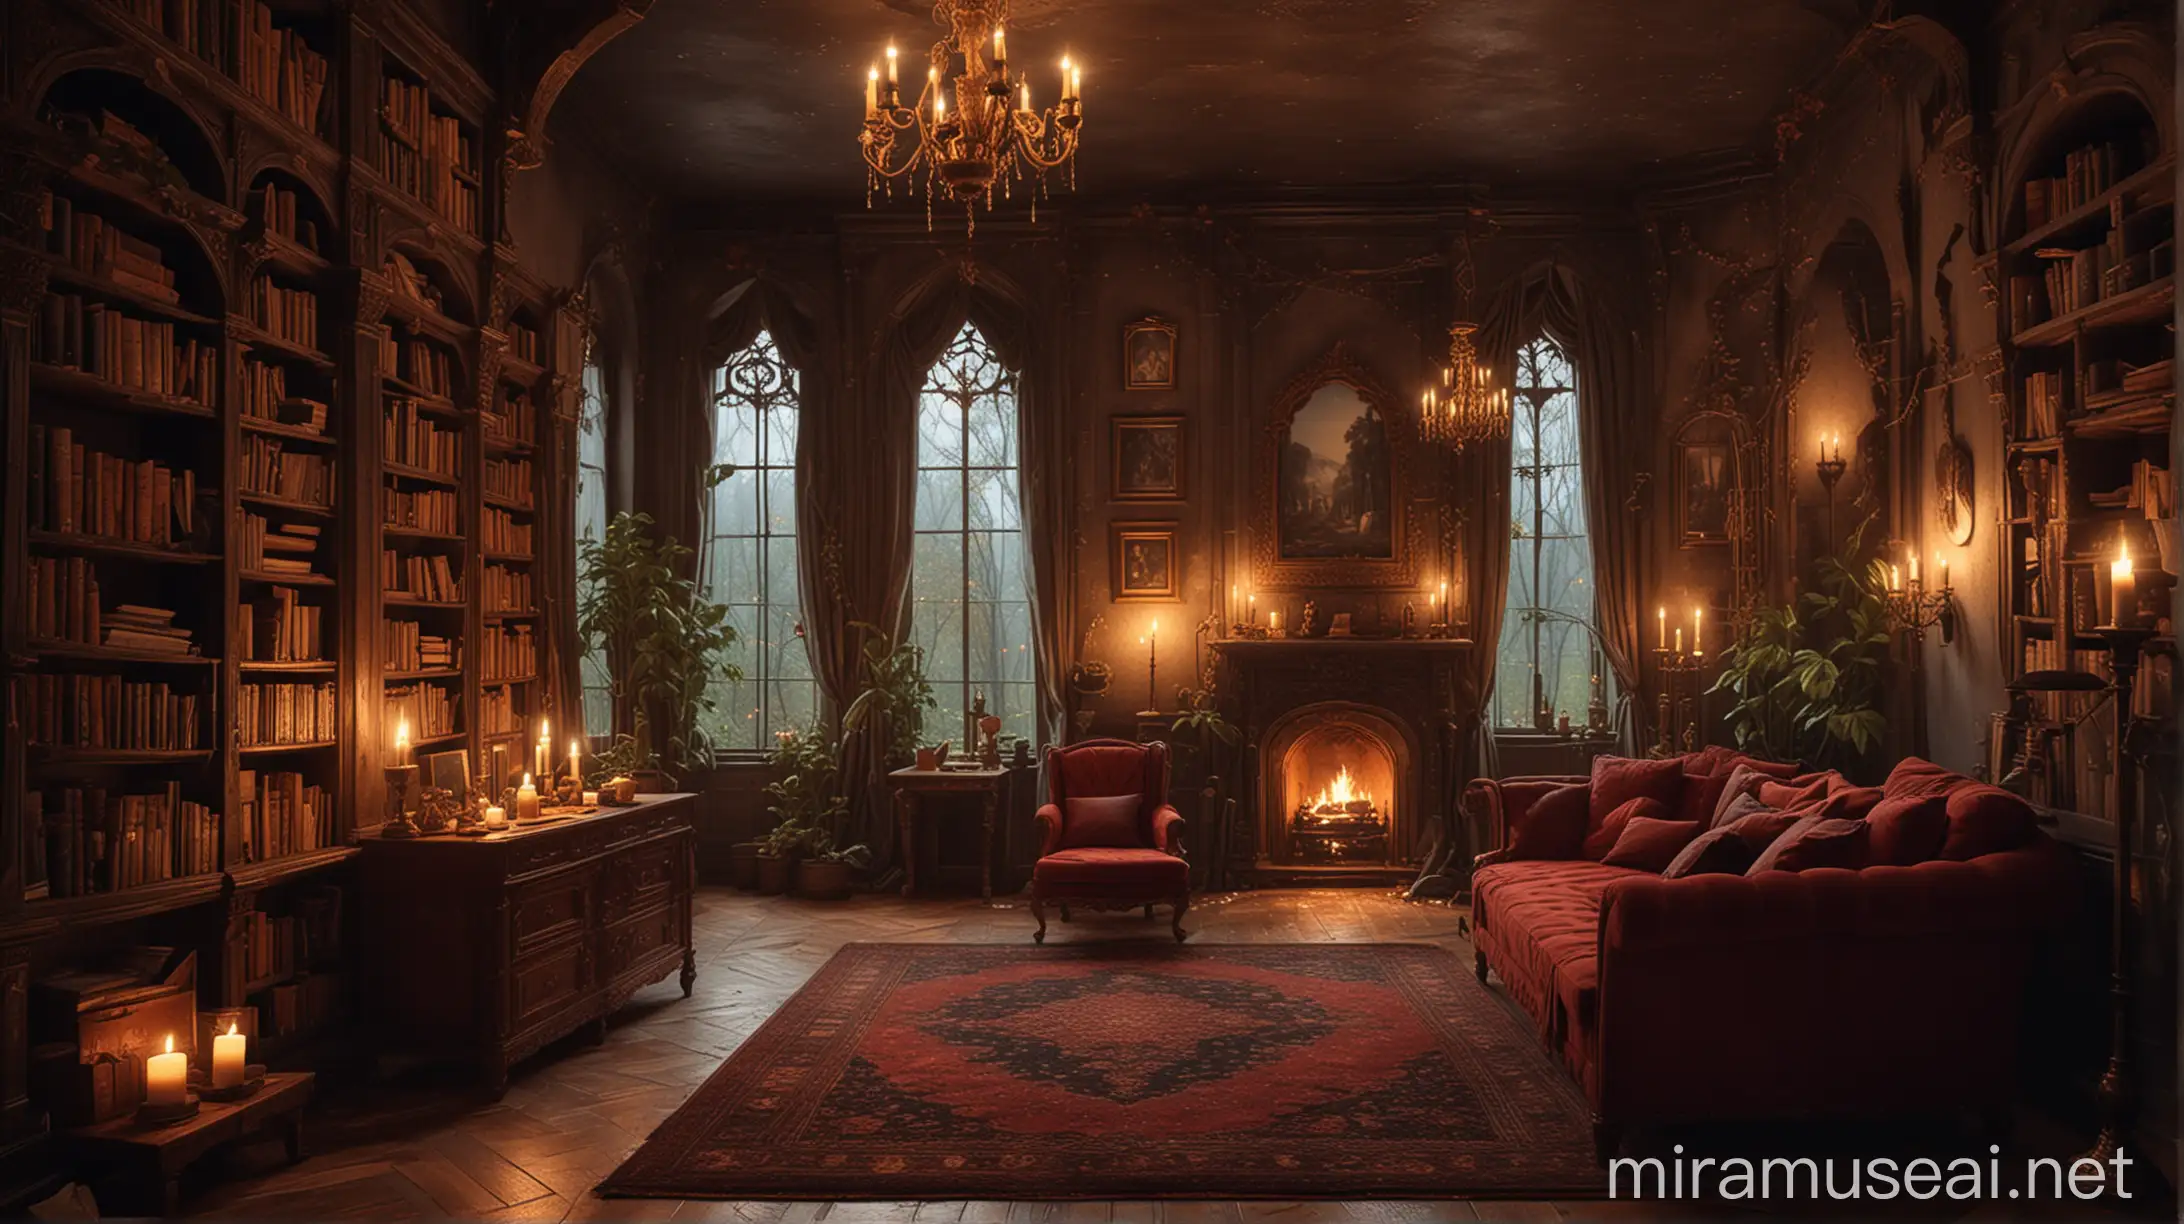 Cozy Castle Royal Mahal inside, with two small cozy plant, pillows, string lights,badroom, a fireplace, big window with a rainy fall night deep forest view., Mysterious room sia view lot of candle a room with a fireplace and a bed in front of a bookcase with a, cosy enchanted scene, gothic library, gothic epic library, gothic mansion room, cozy atmospheric, cozy atmosphere, cozy room, inside a castle library, cozy place, warmly lit posh study, cozy wallpaper, castle library, cosy atmoshpere, inside an epic gothic castle, cosy atmosphere, gothic epic library concept, warm interior, victorian room, cozy and calm, magic library